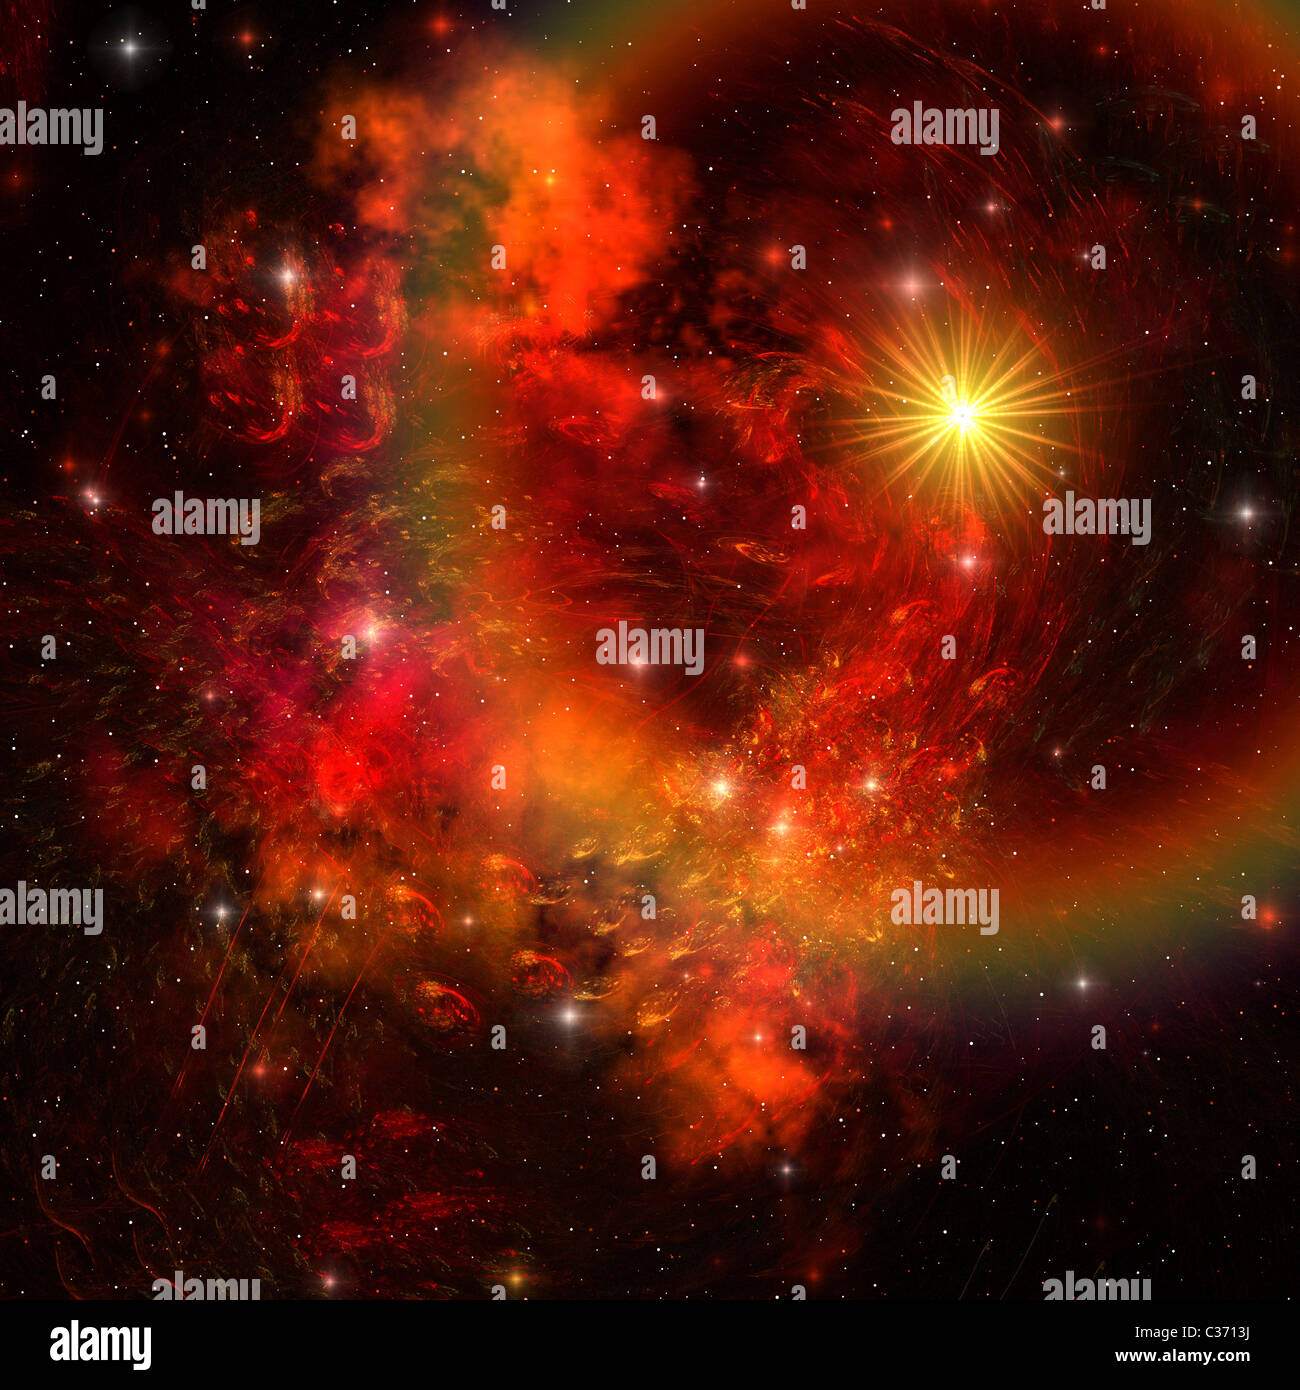 A huge star explodes sending out shock waves throughout the universe. Stock Photo